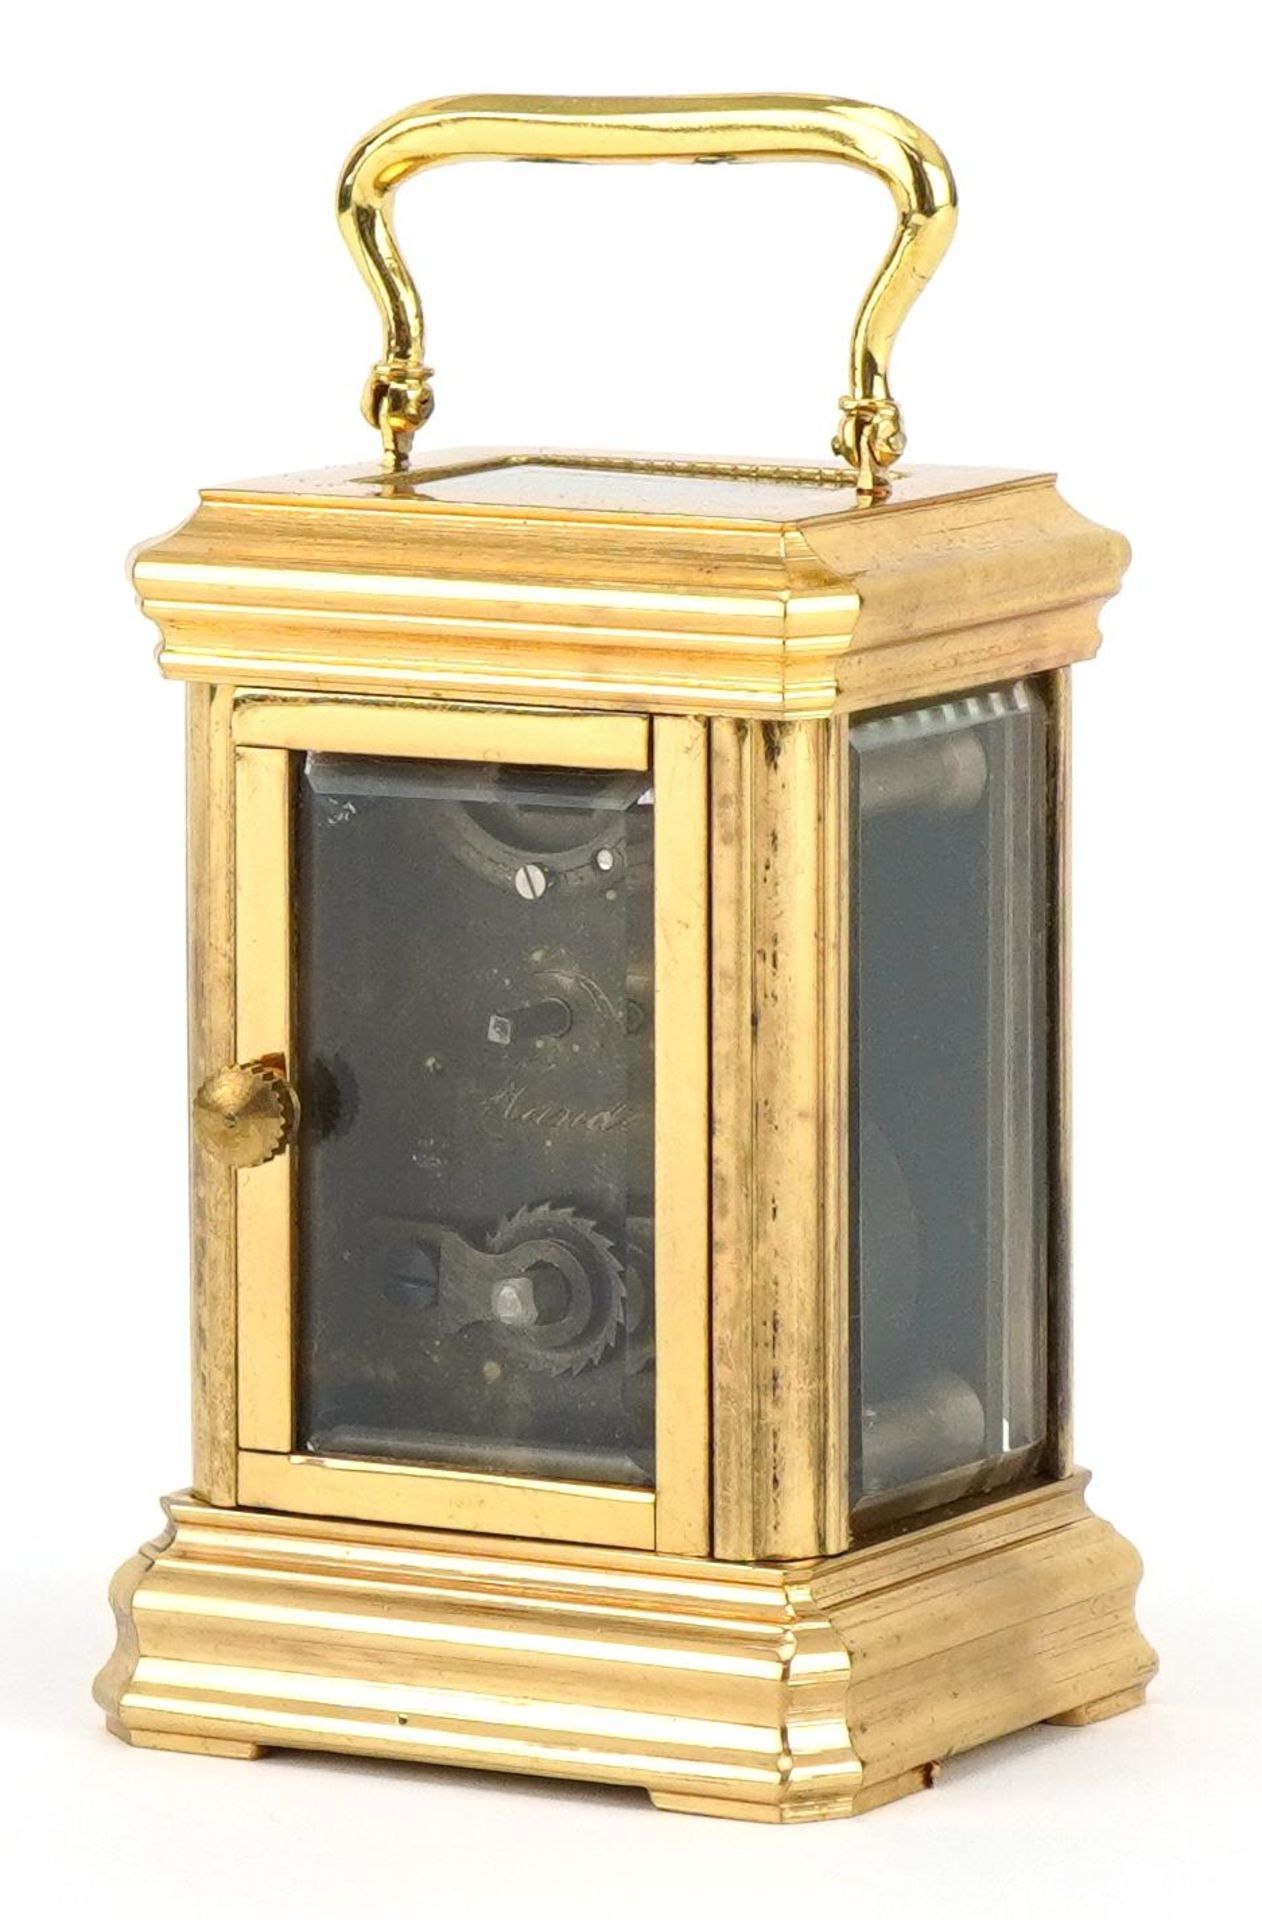 Miniature brass carriage clock with enamelled dial having Roman numerals, 9.5cm high : For further - Image 2 of 4